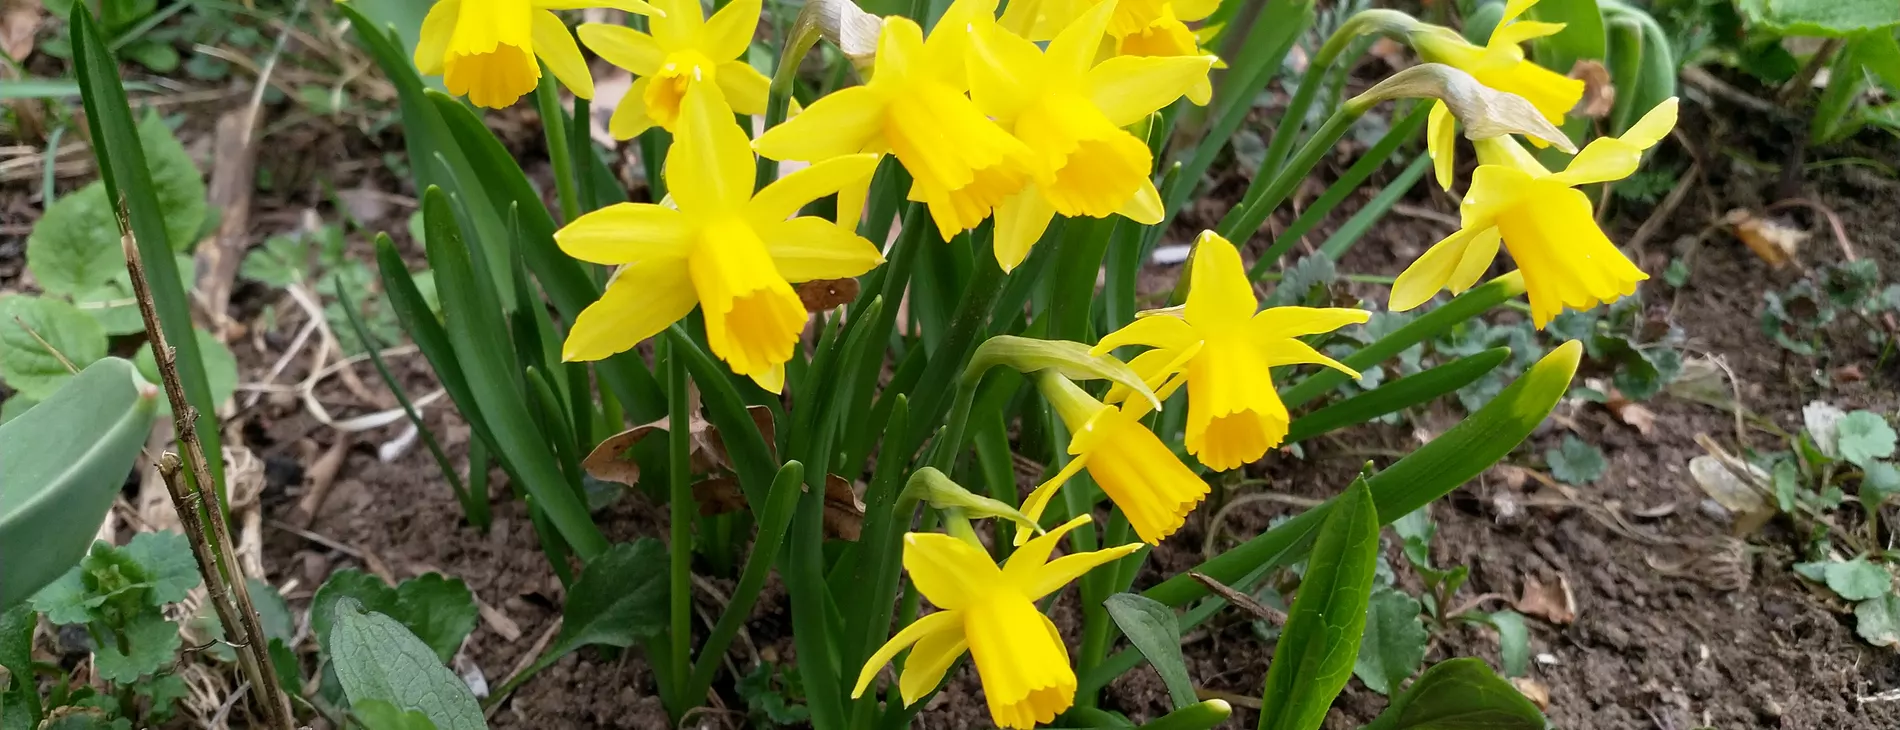 The first bunch of daffodils is open